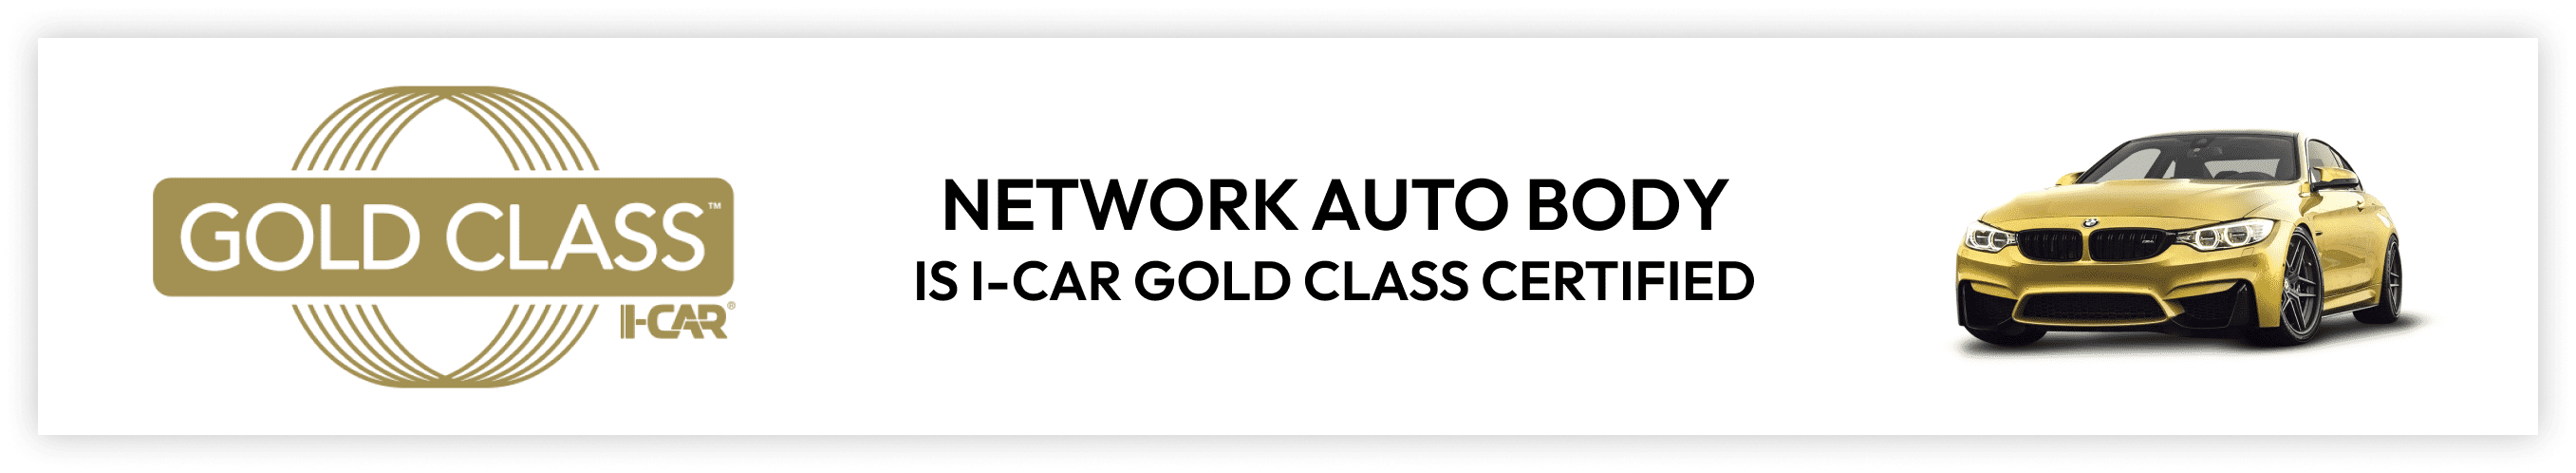 Network Auto Body Certified I Car Gold